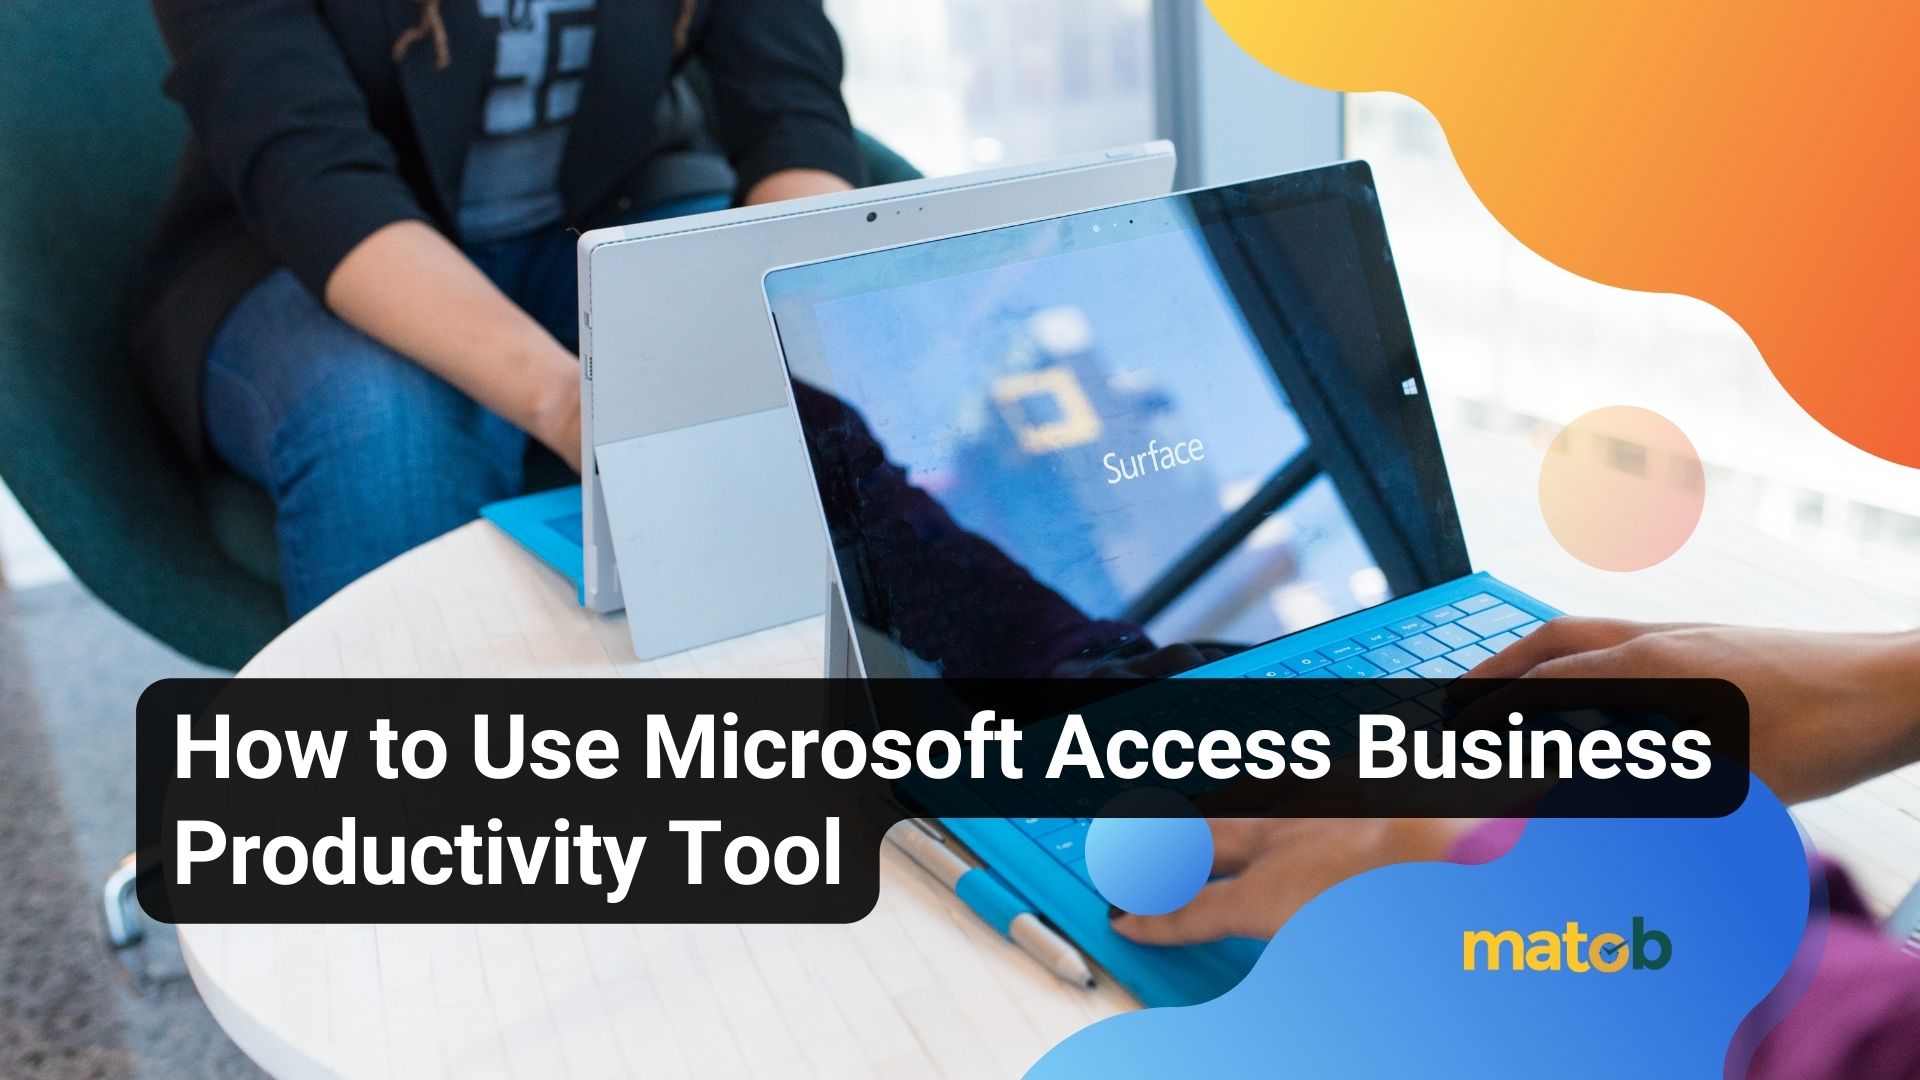 How to Use Microsoft Access Business Productivity Tool